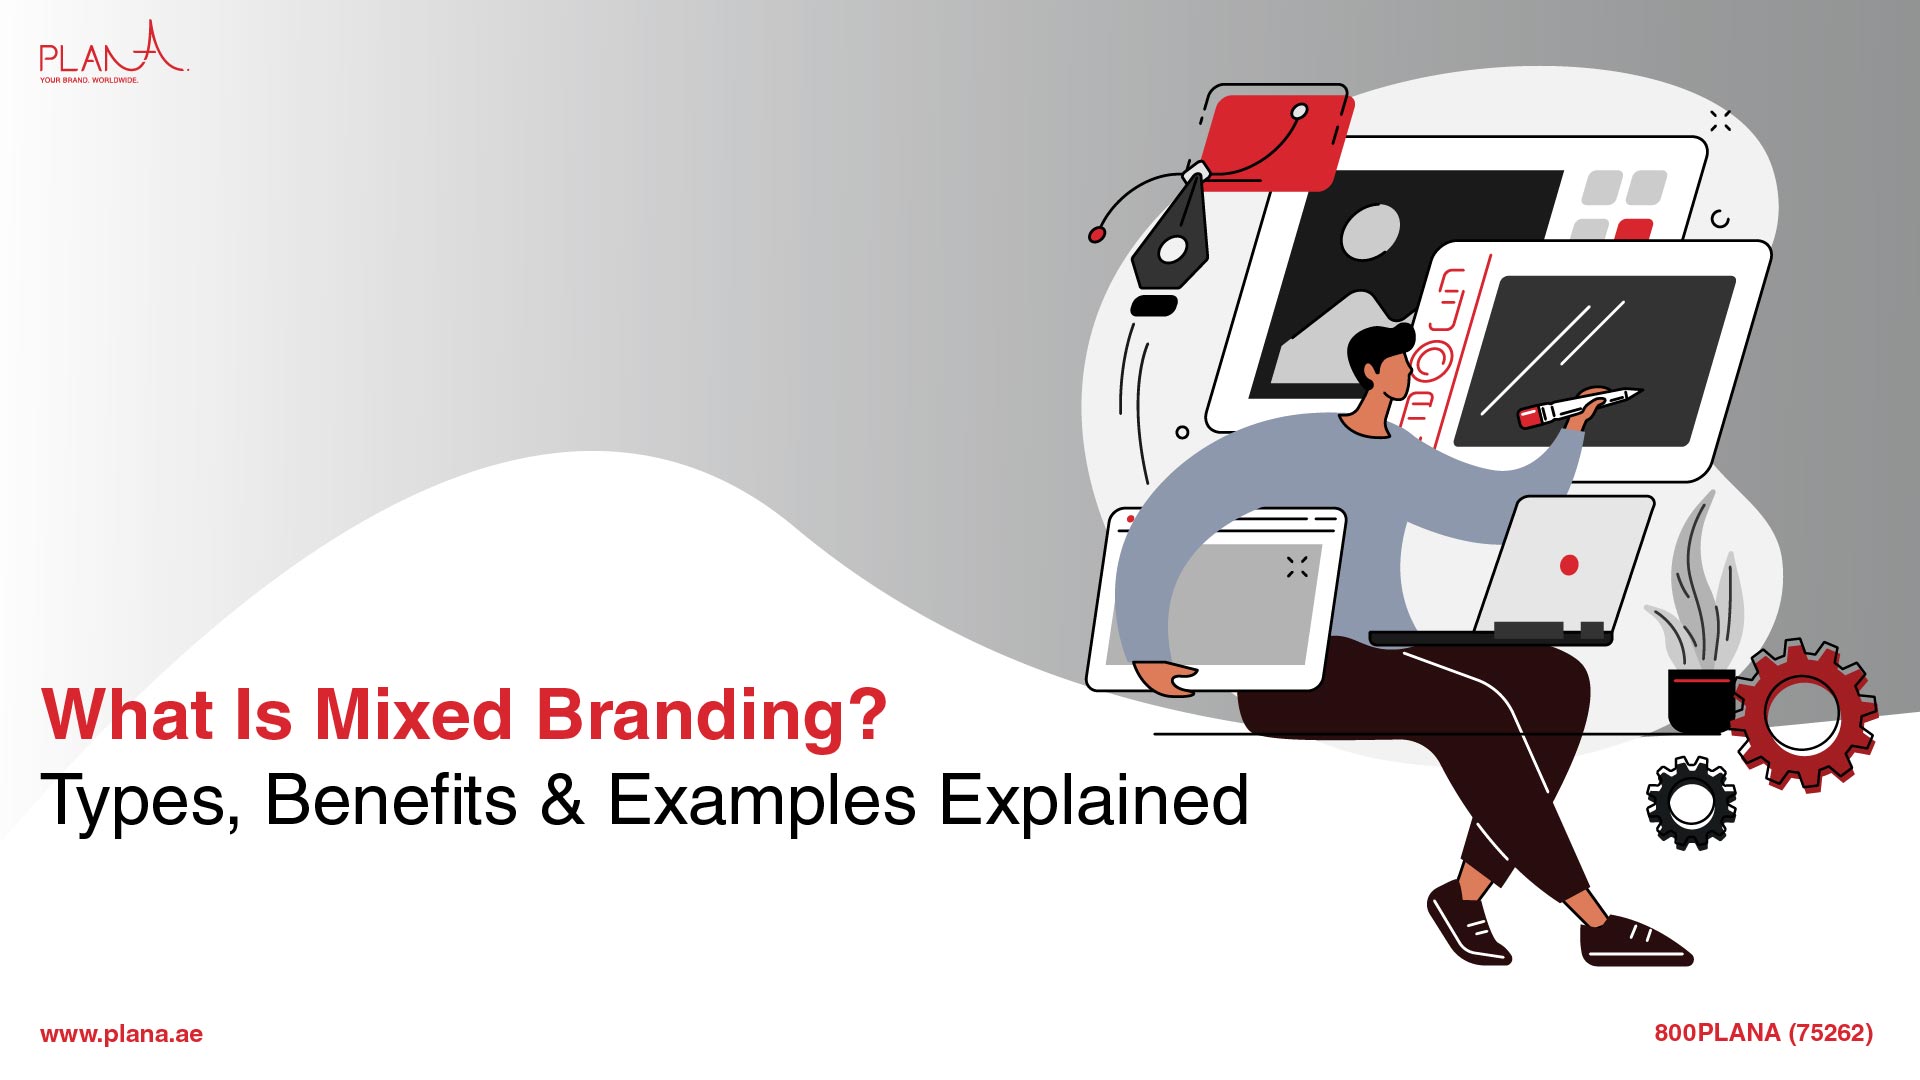 What Is Mixed Branding? Types, Benefits & Examples Explained